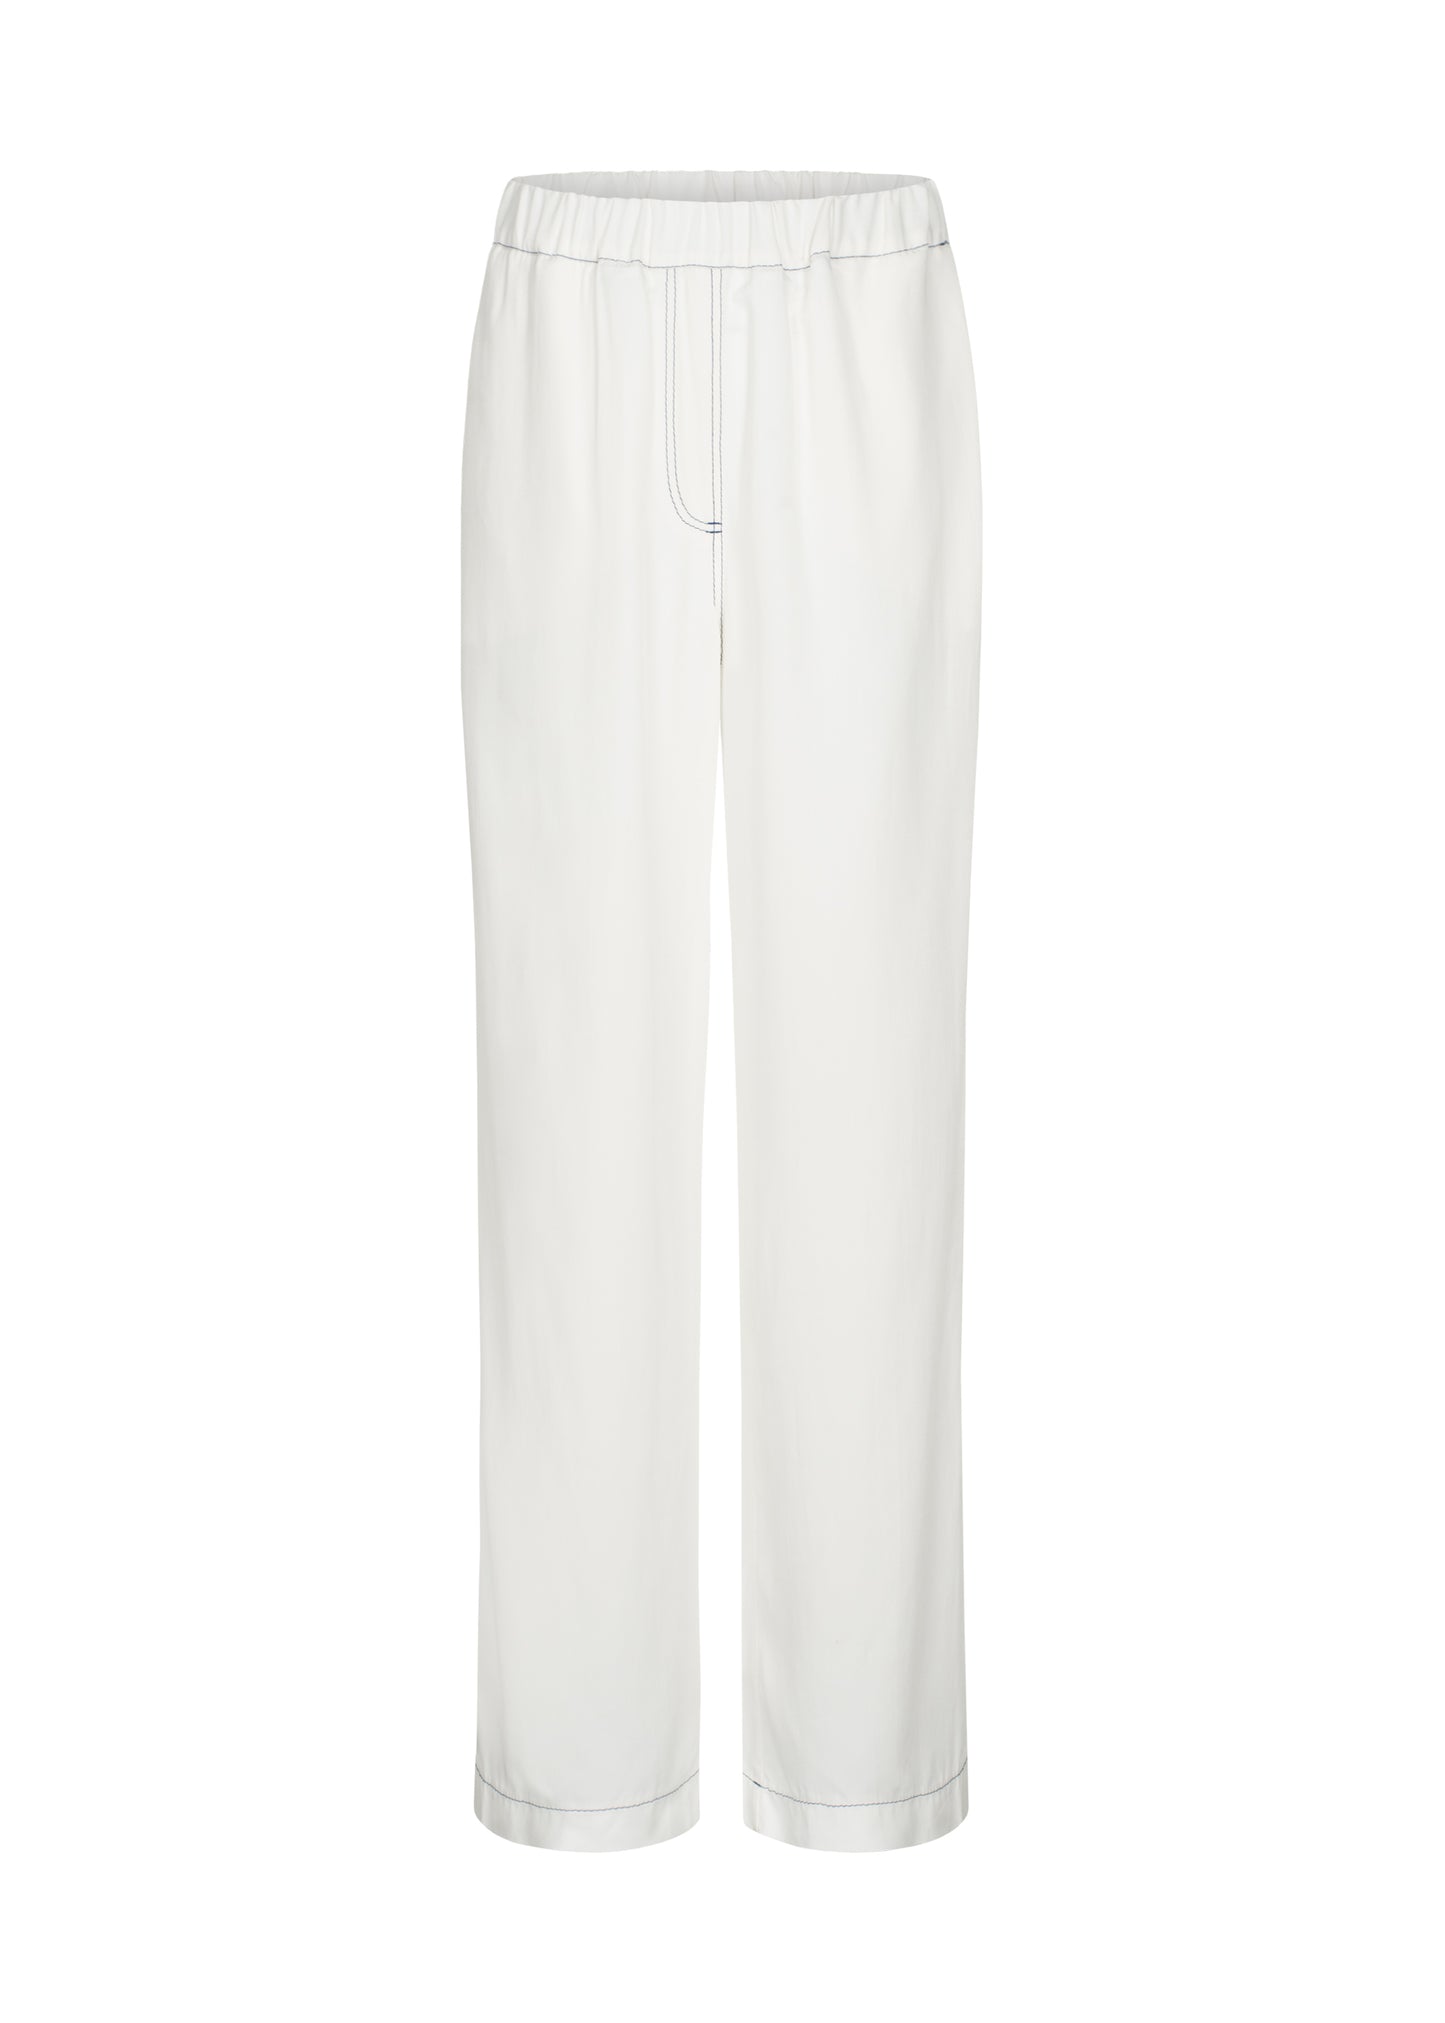 Viscose milky-white contrast-stitch straight trousers from FORMA featuring a mid-rise elasticated waistband